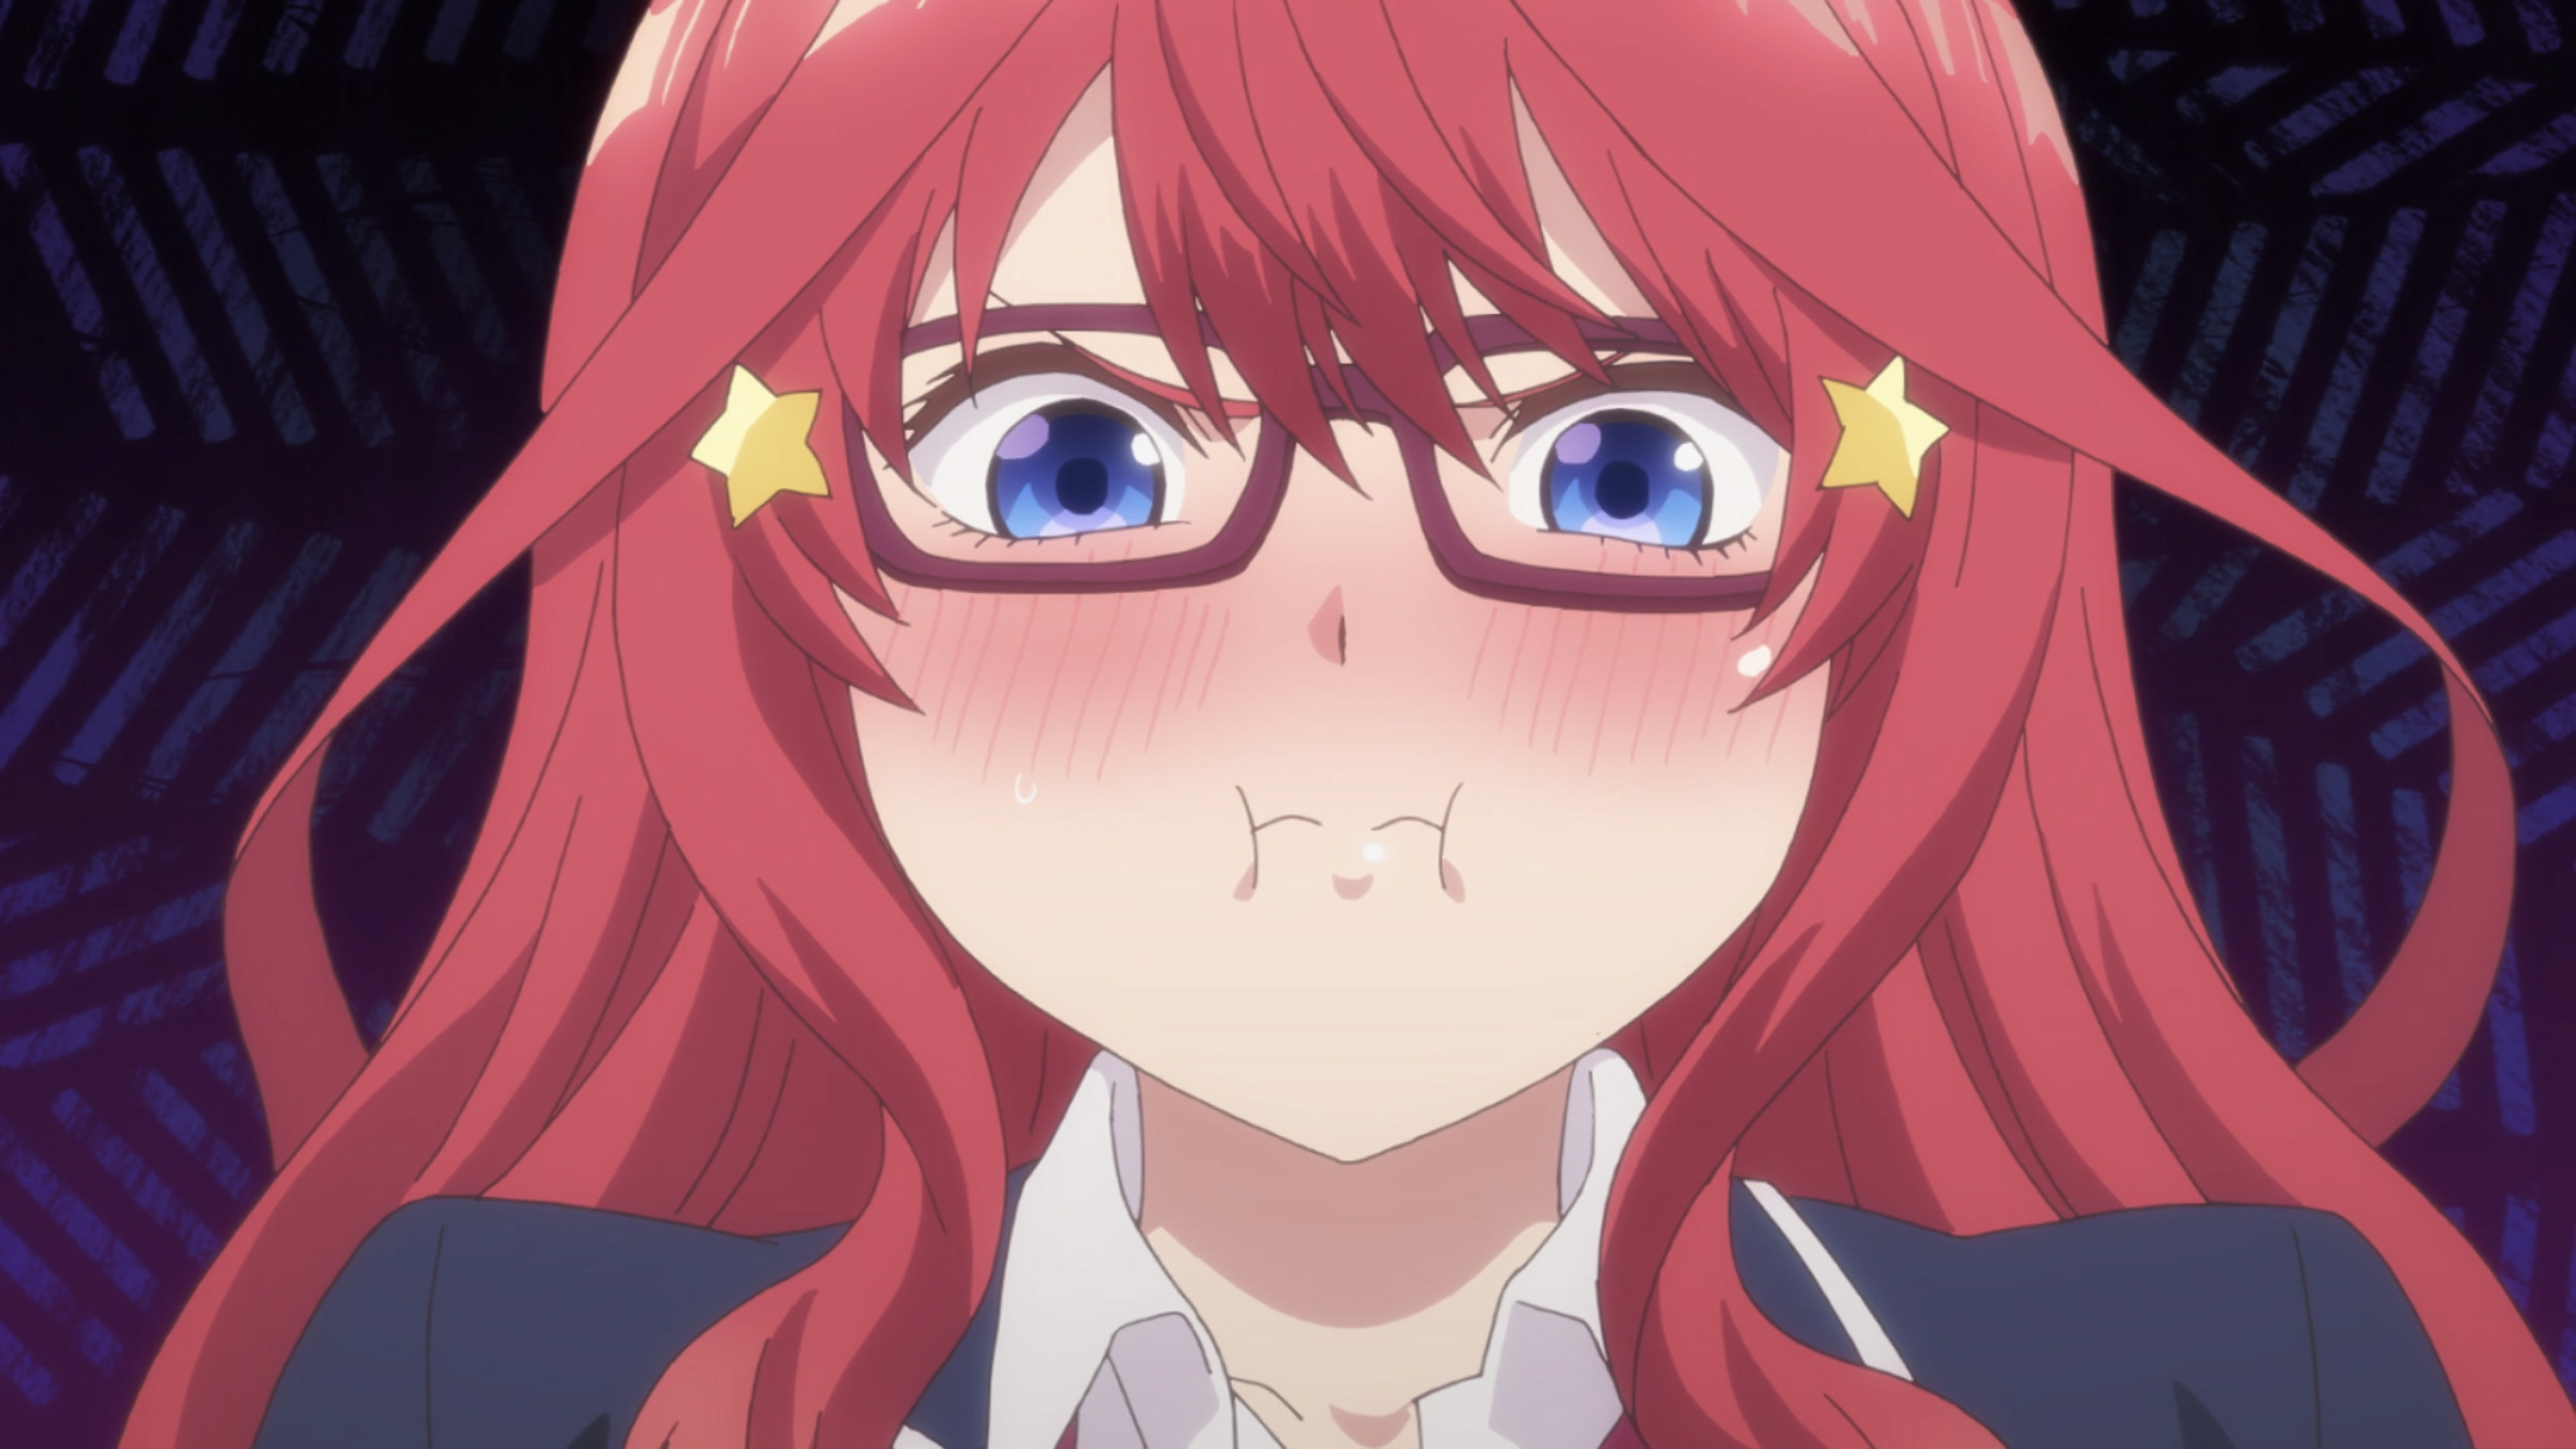 Crunchyroll - Itsuki Nakano Is the Star of the 5th The Quintessential  Quintuplets Season 2 TV Anime Character Trailer